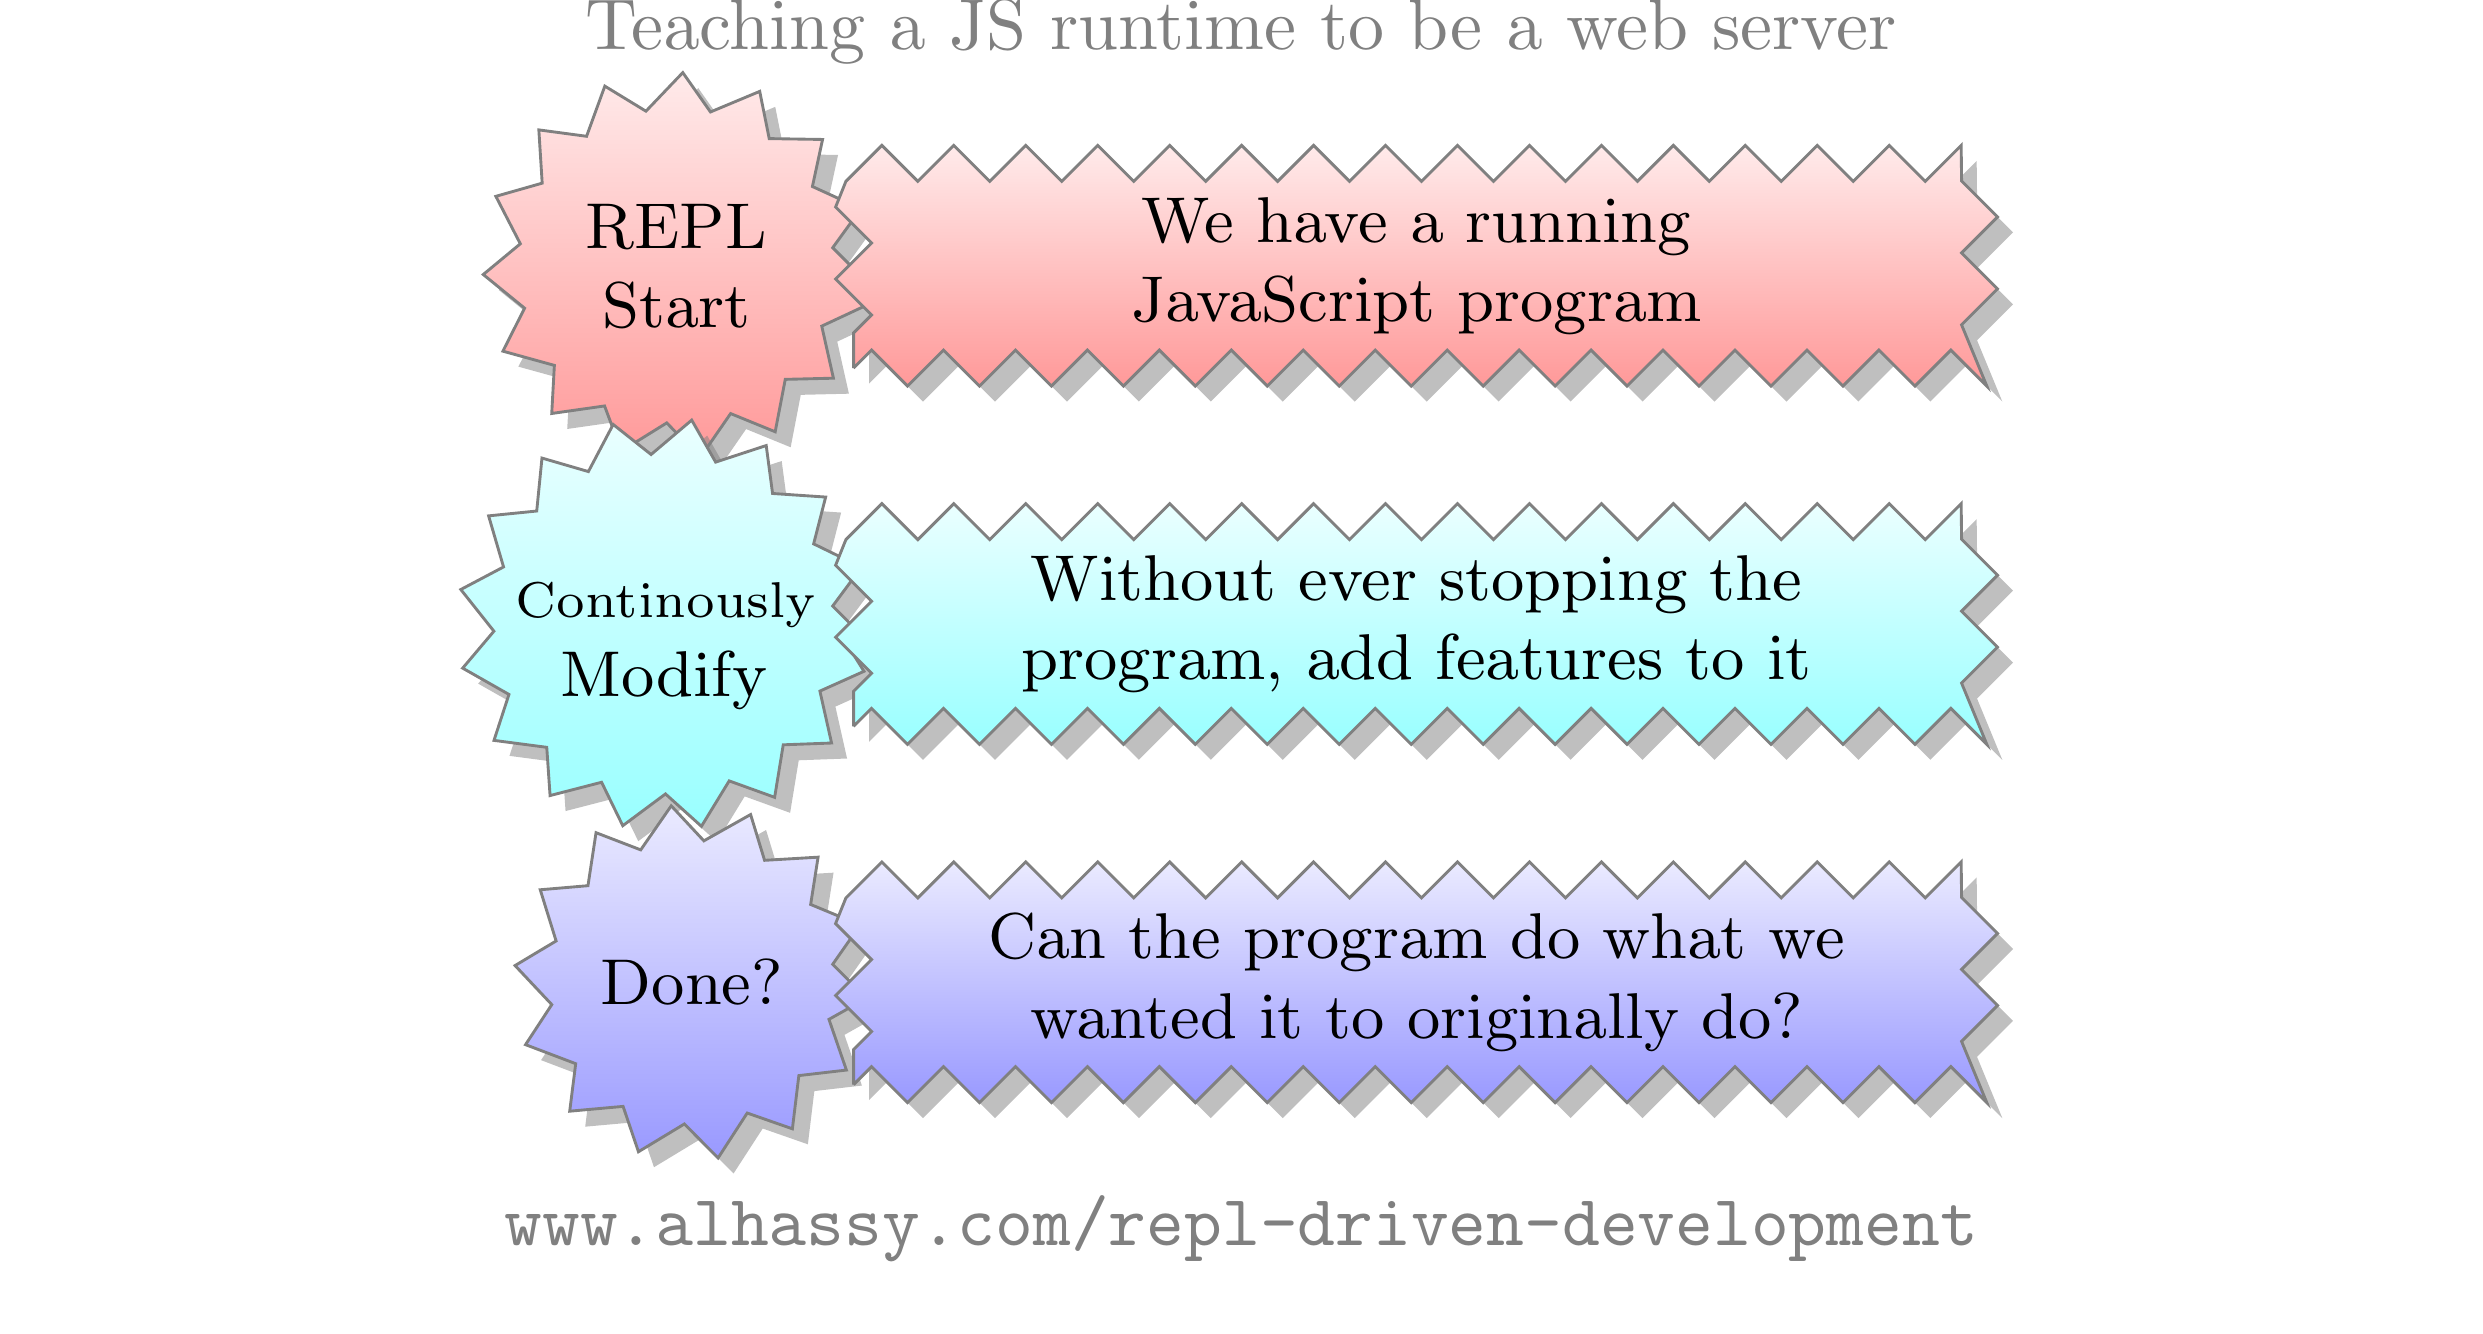 file:../images/rdd-teaching-a-js-runtime-to-be-a-webserver.png